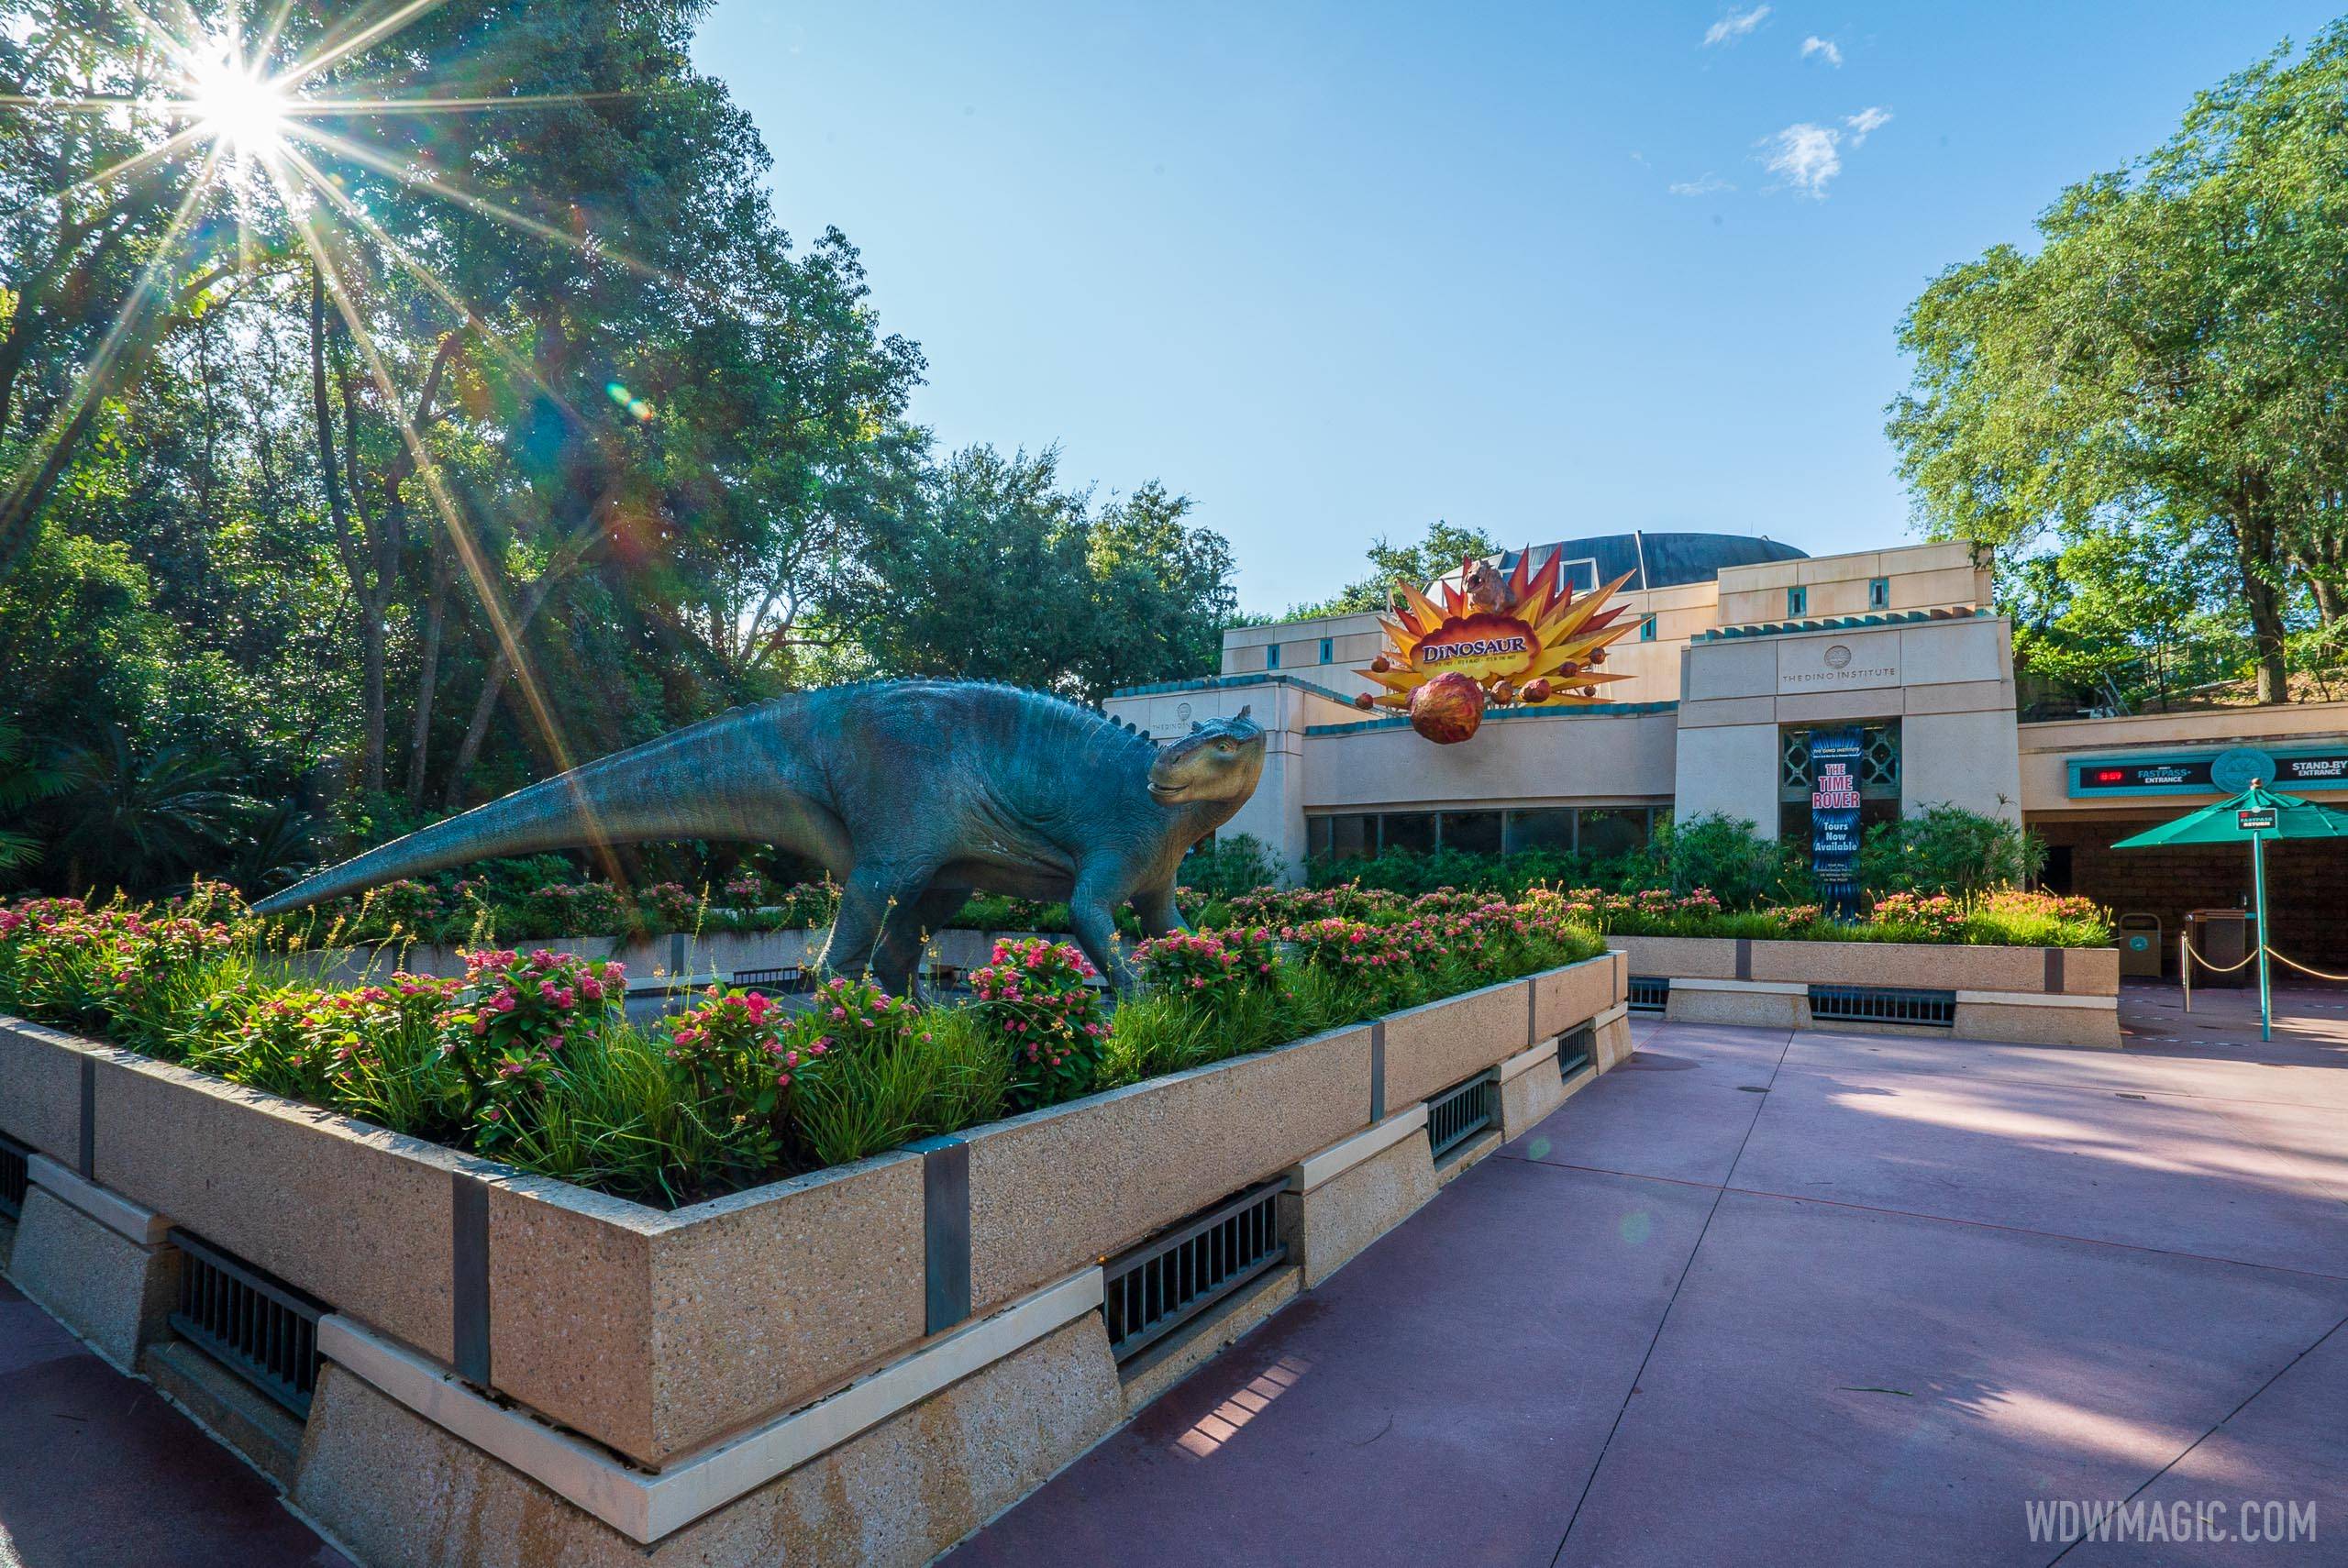 VIDEO - Dinosaur reopens from refurbishment with updated effects